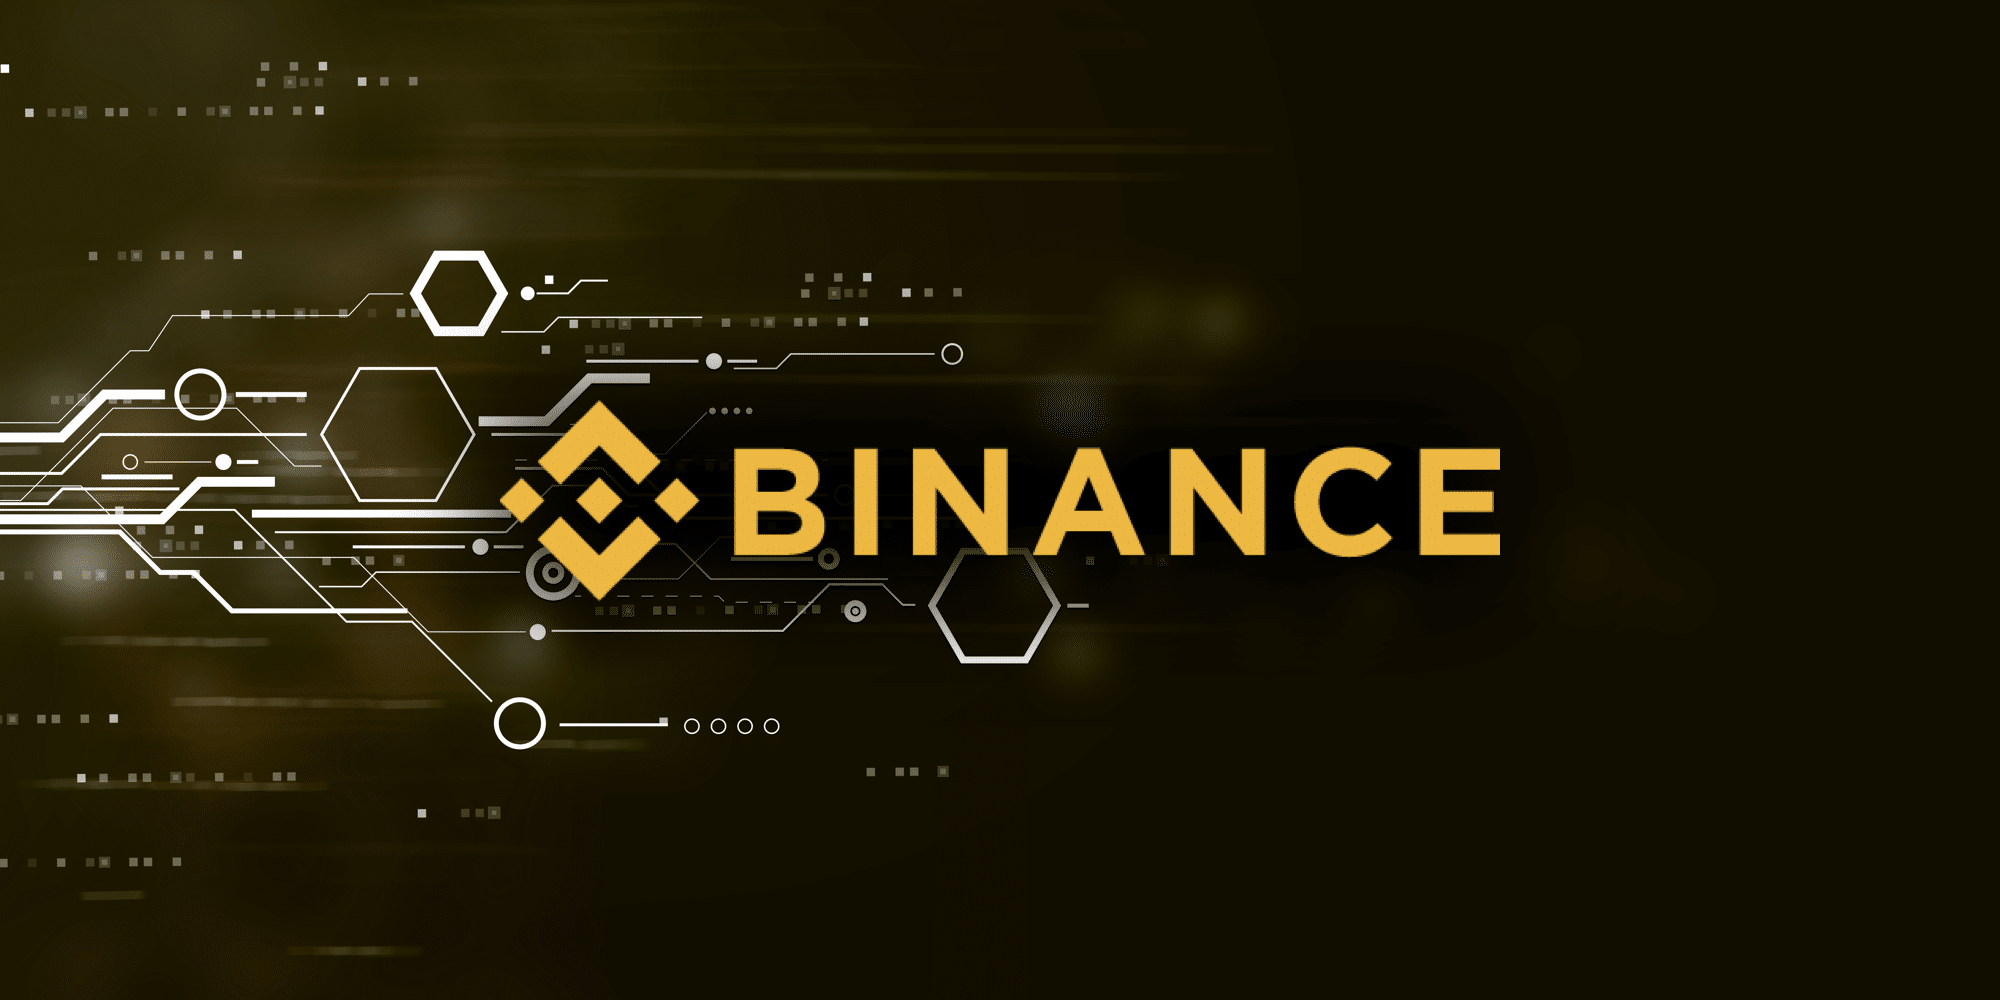 Binance not hacked - Releases statement